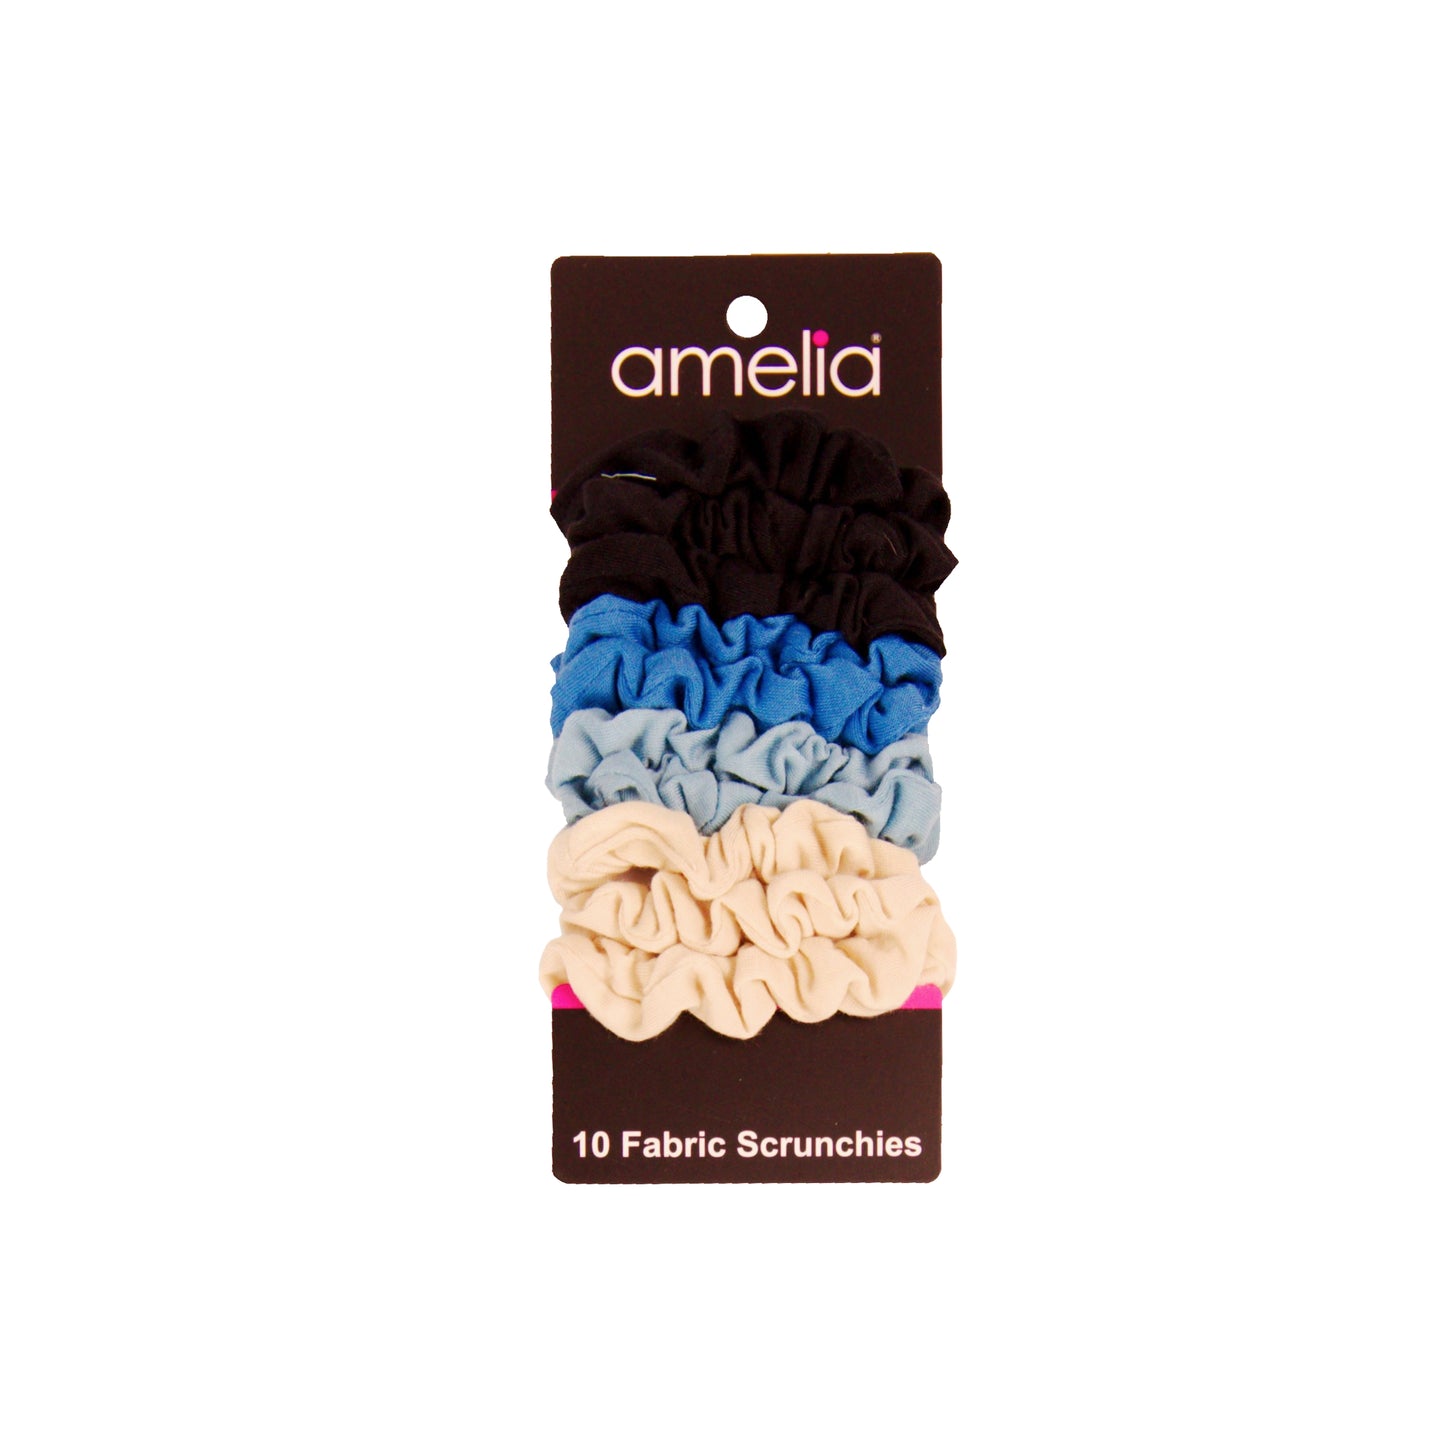 Amelia Beauty, Medium Ocean Mix Jersey Scrunchies, 2.5in Diameter, Gentle on Hair, Strong Hold, No Snag, No Dents or Creases. 10 Pack